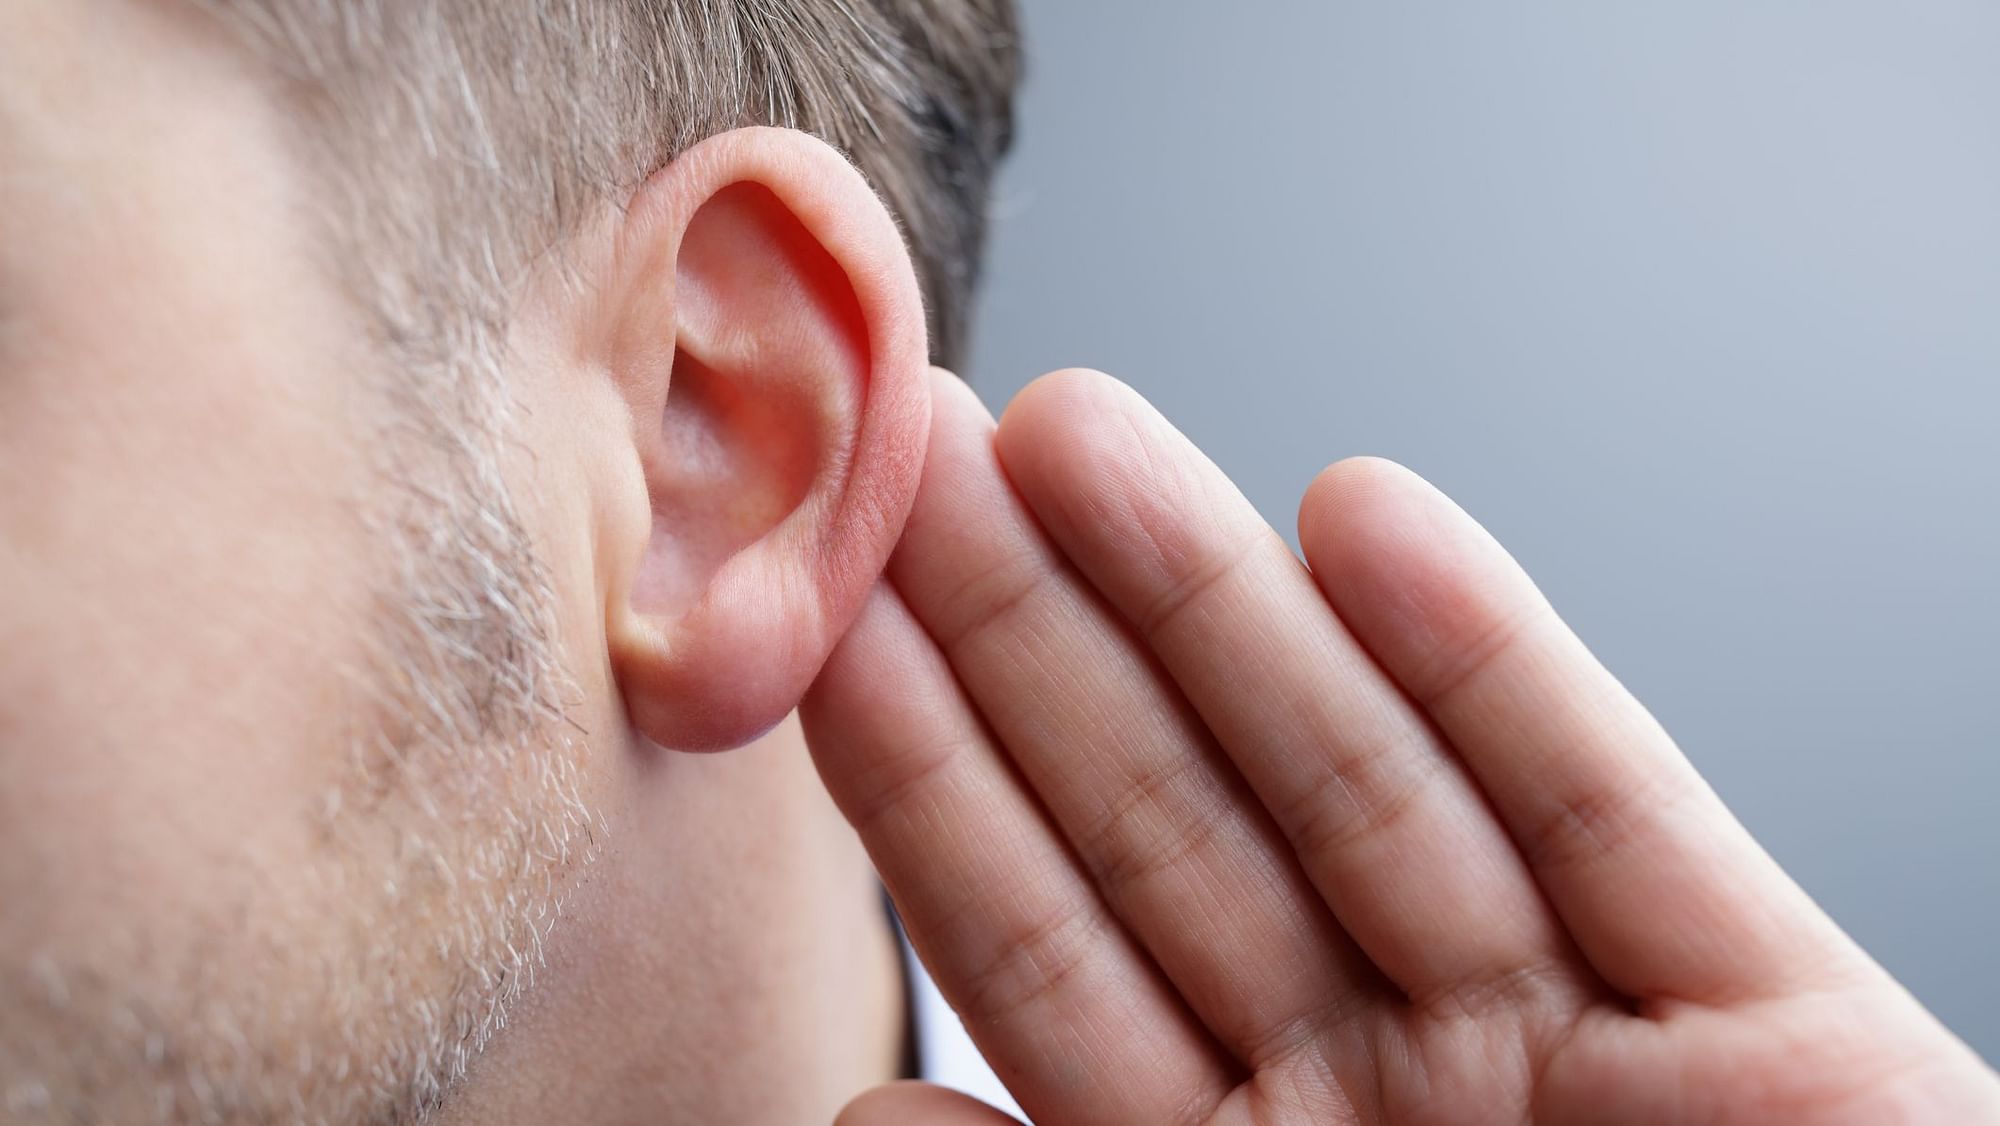 More than one billion people risk irreversible hearing loss from exposure to loud sounds, UN health experts have warned.